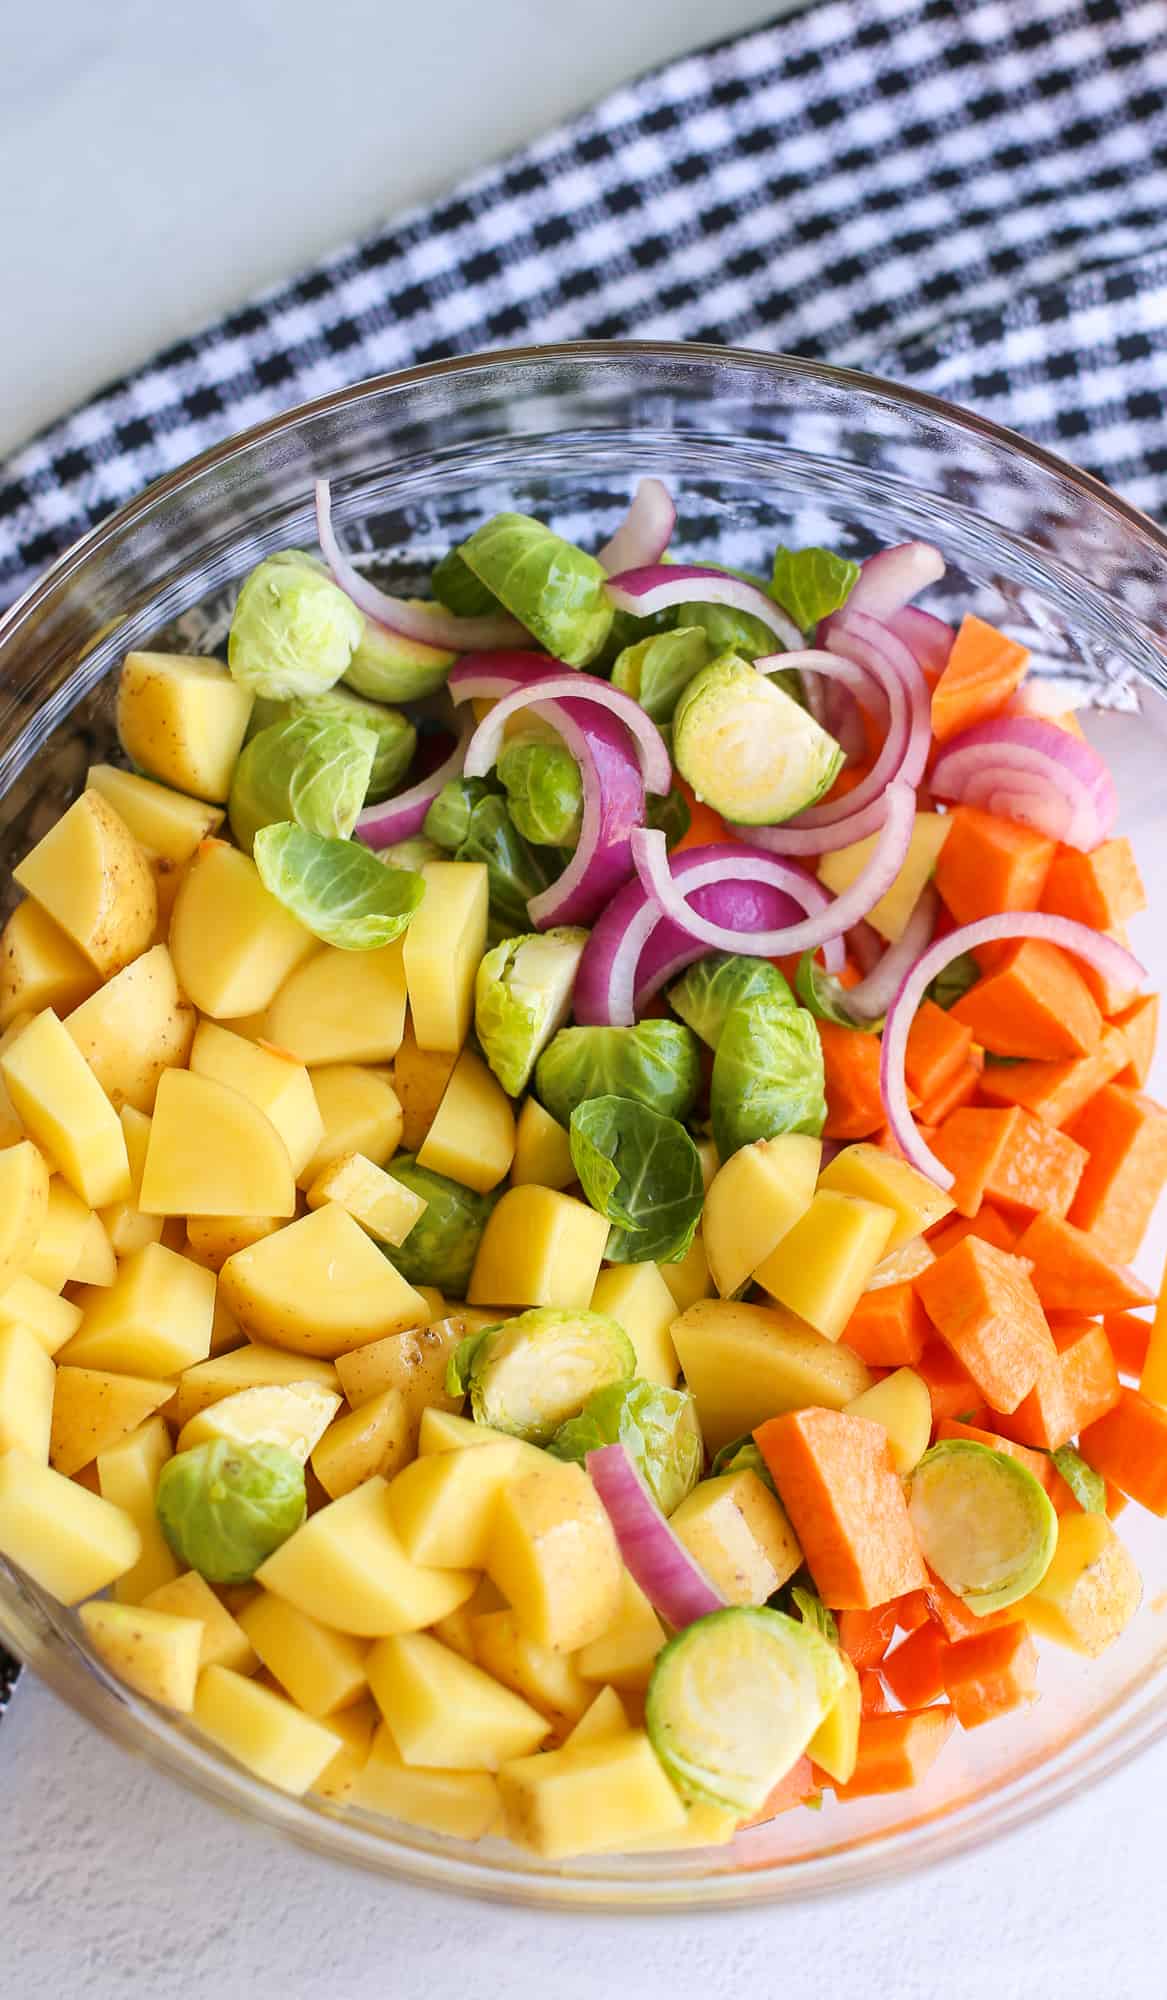 A bowl of cut up vegetables ready to grill.